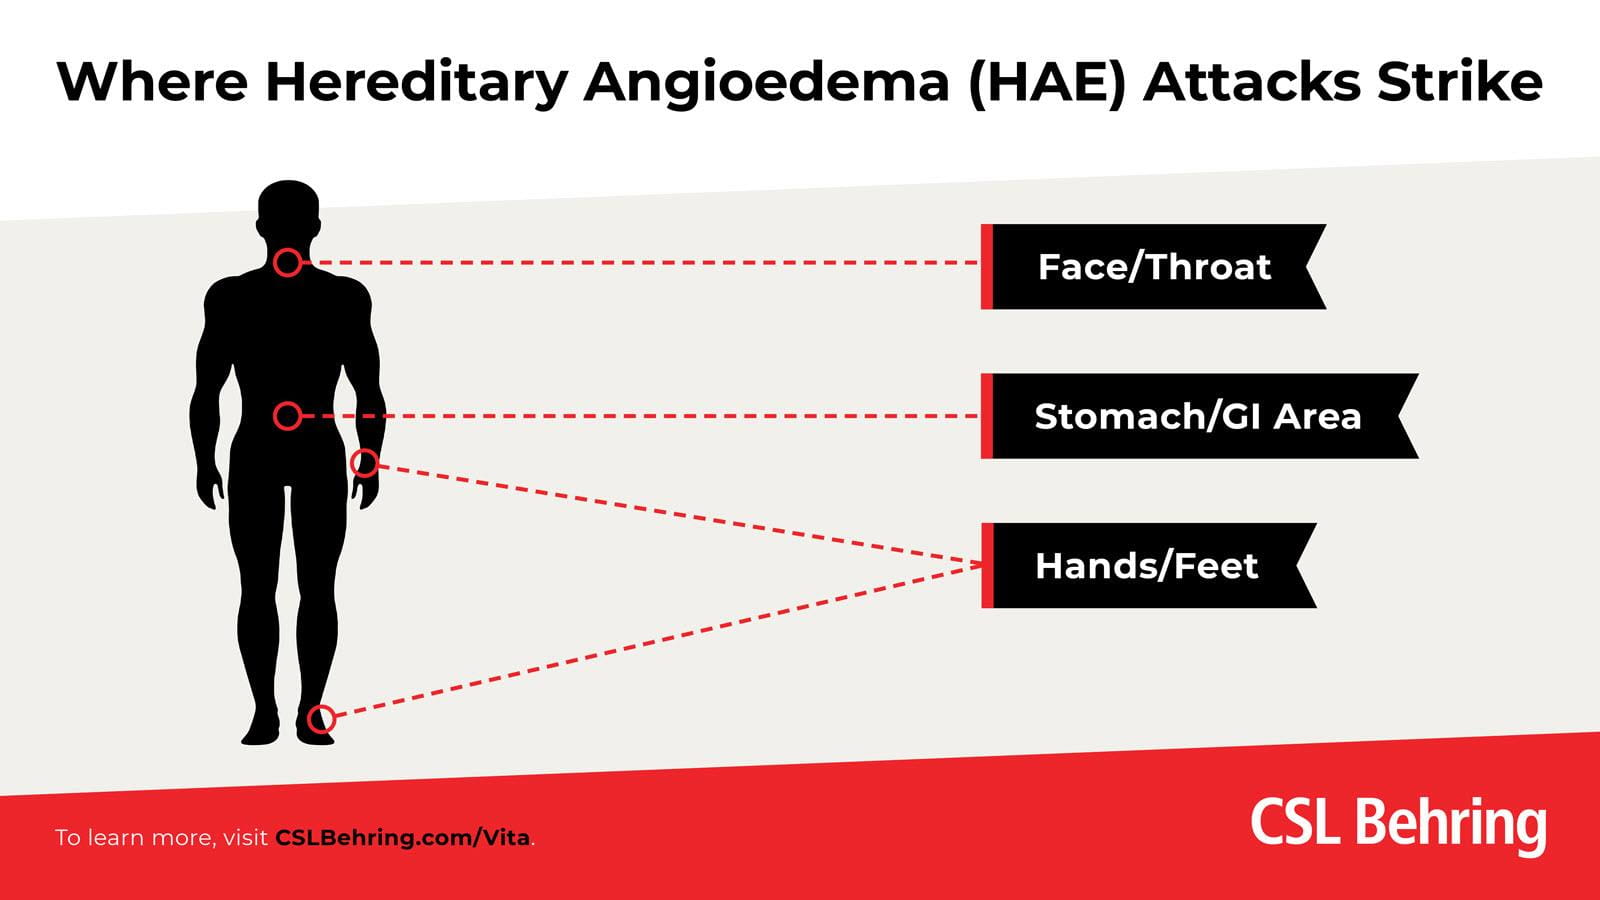 silhouette of human body showing HAE attacks can affect the face/throat, stomach/GI area and hands/feet.